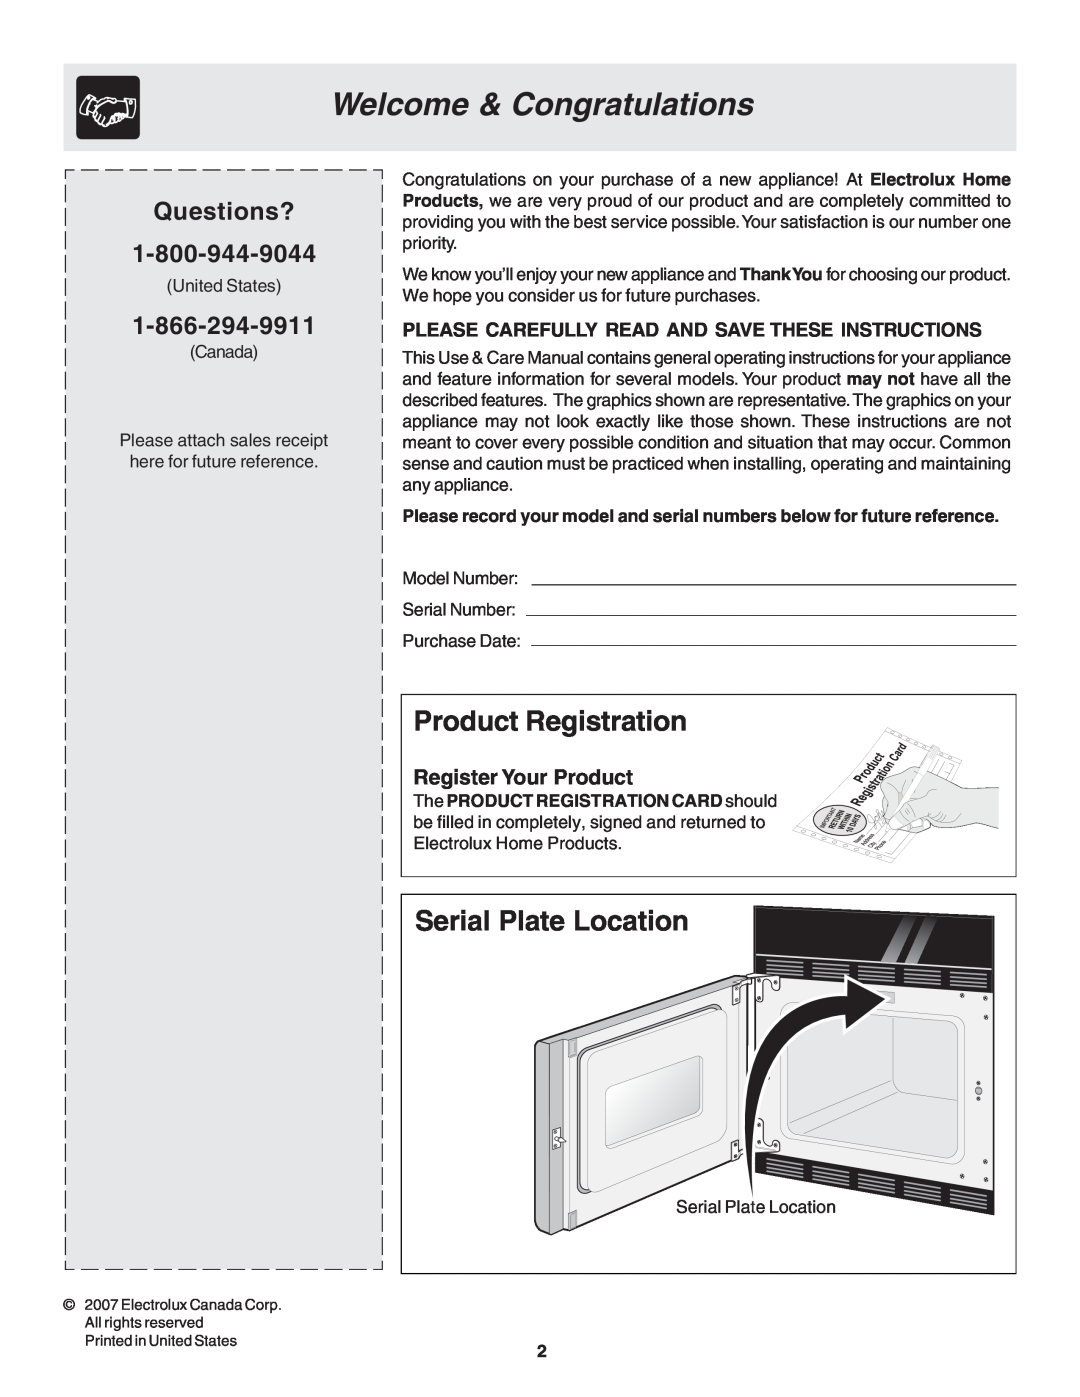 Frigidaire 318205121 warranty Welcome & Congratulations, Product Registration, Serial Plate Location, Questions? 